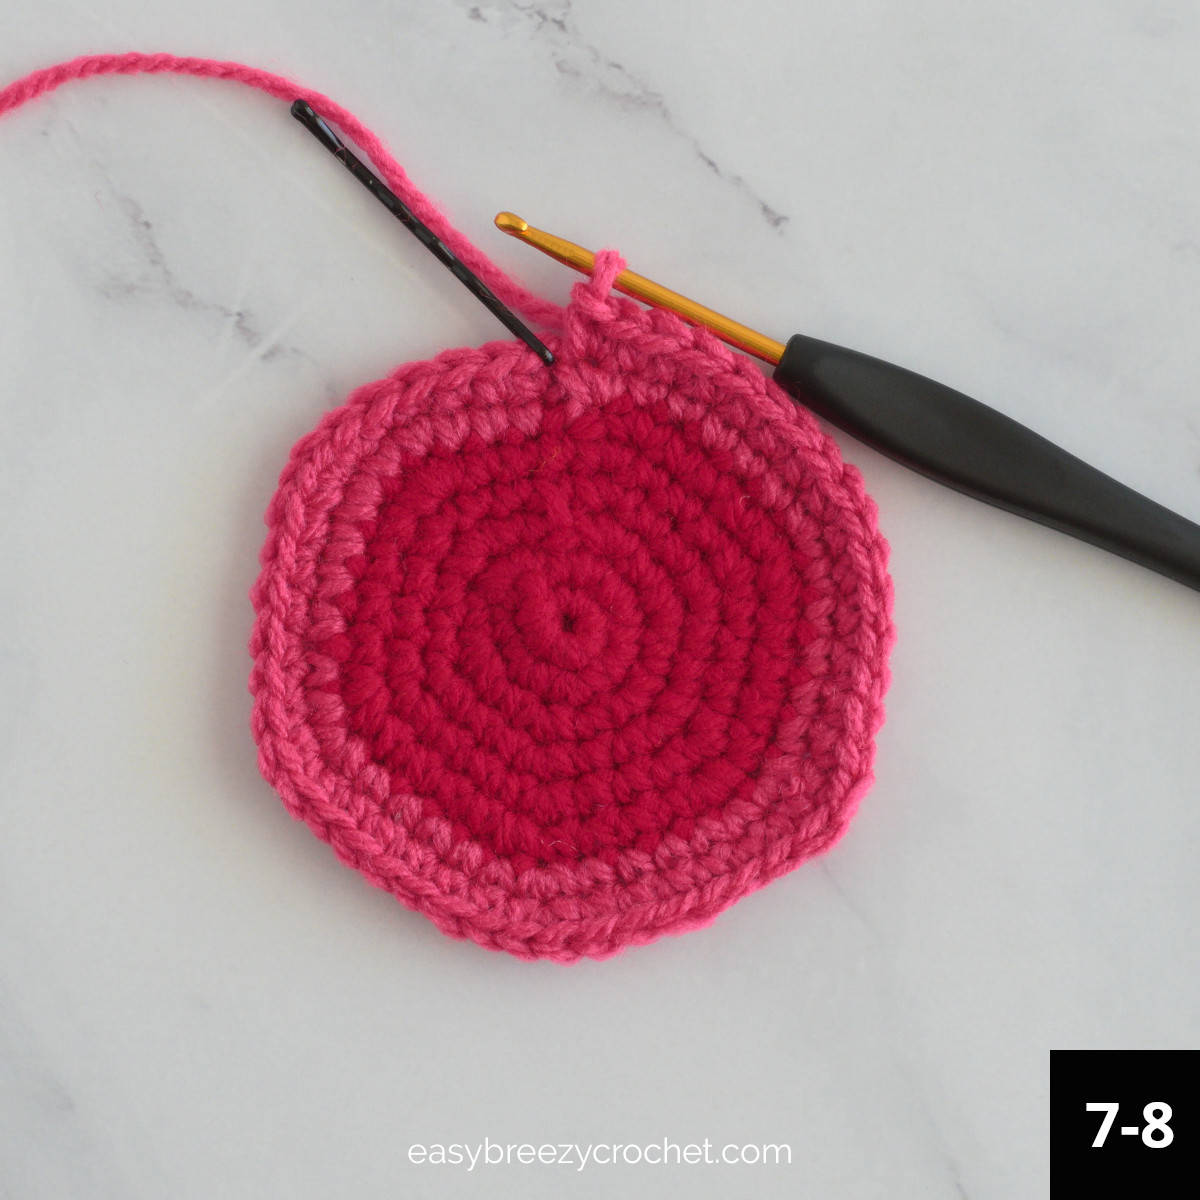 A red and pink crochet circle.